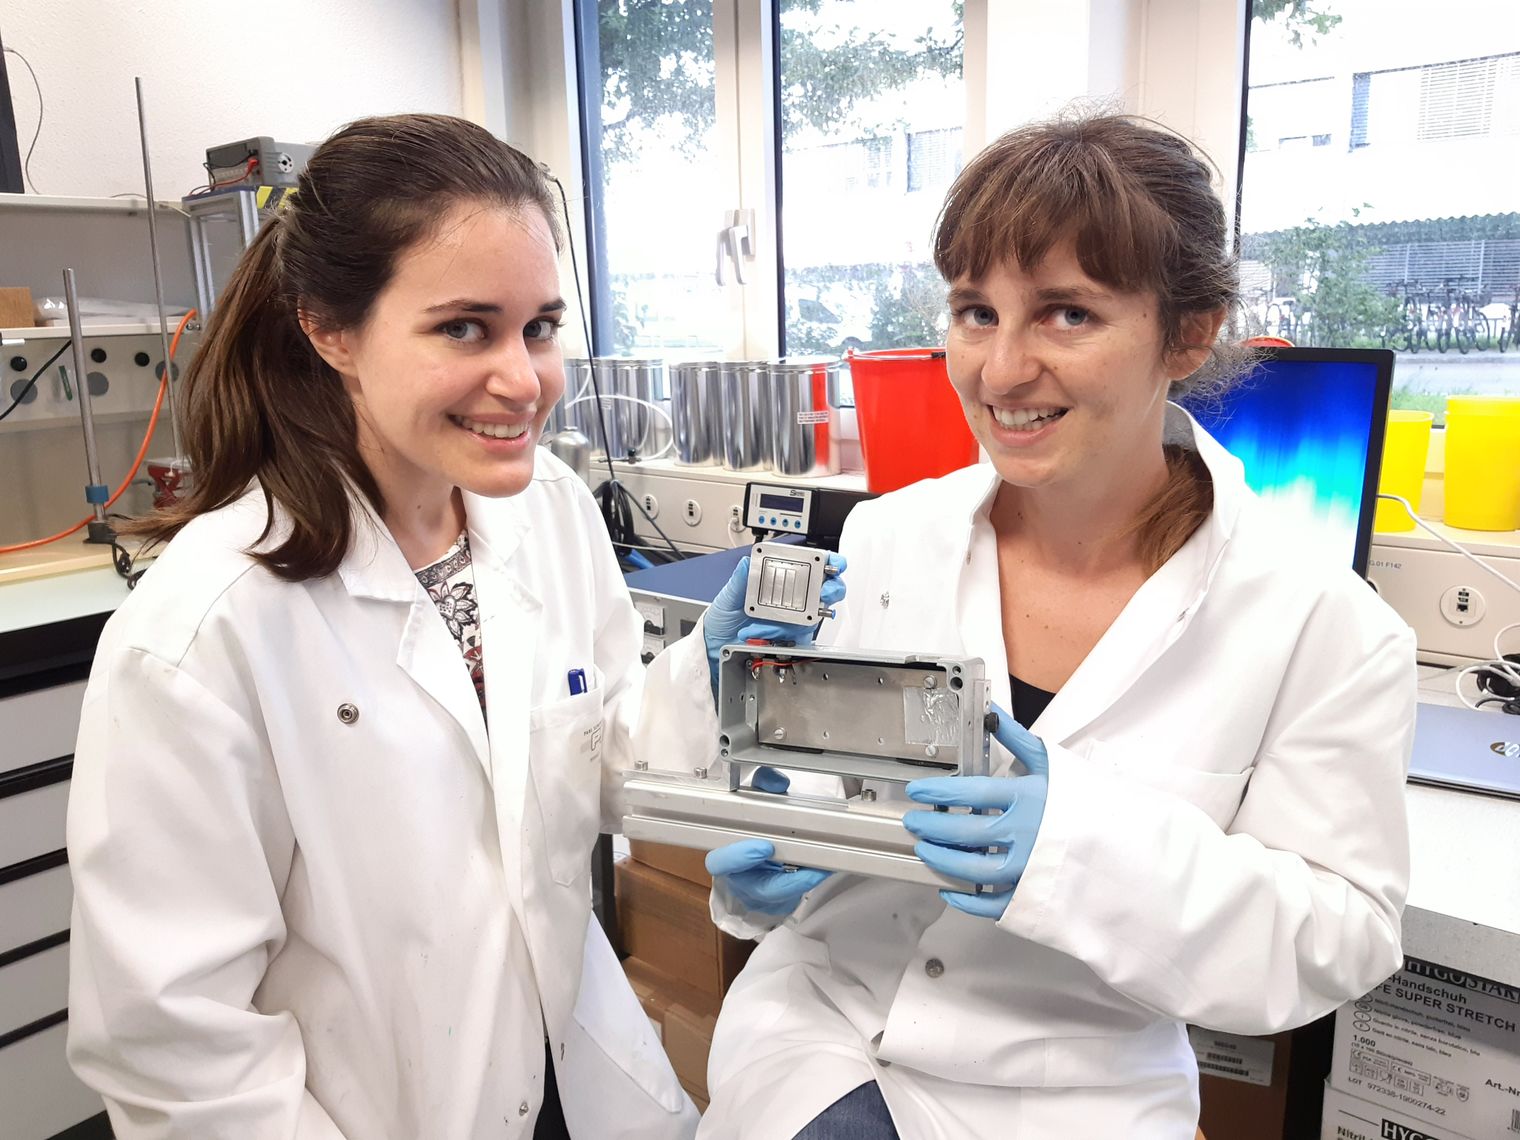 Victoria Manzi and Muriel Siegwart from PSI in Switzerland holding the test cell used in the experiment. Credit: Natasa Diklic, PSI